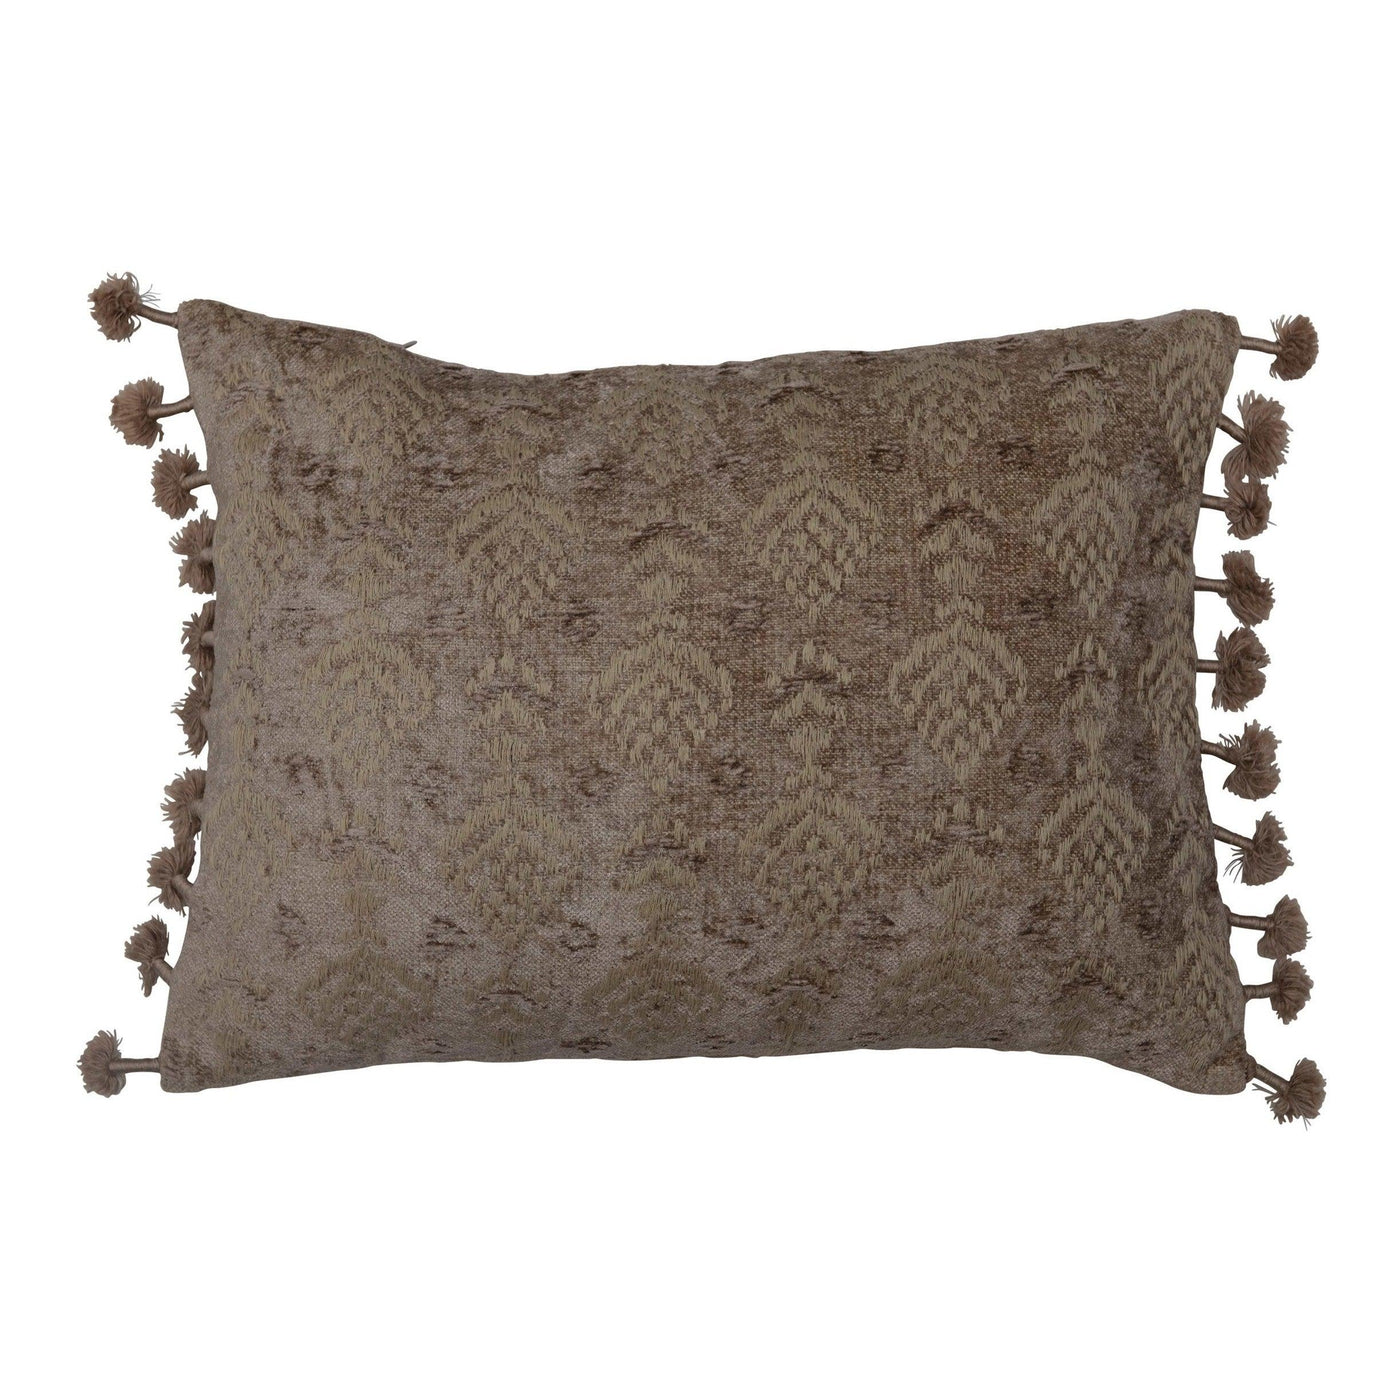 Chenille Lumbar Pillow W/ Embroidery & Tassels - Birch and Bind